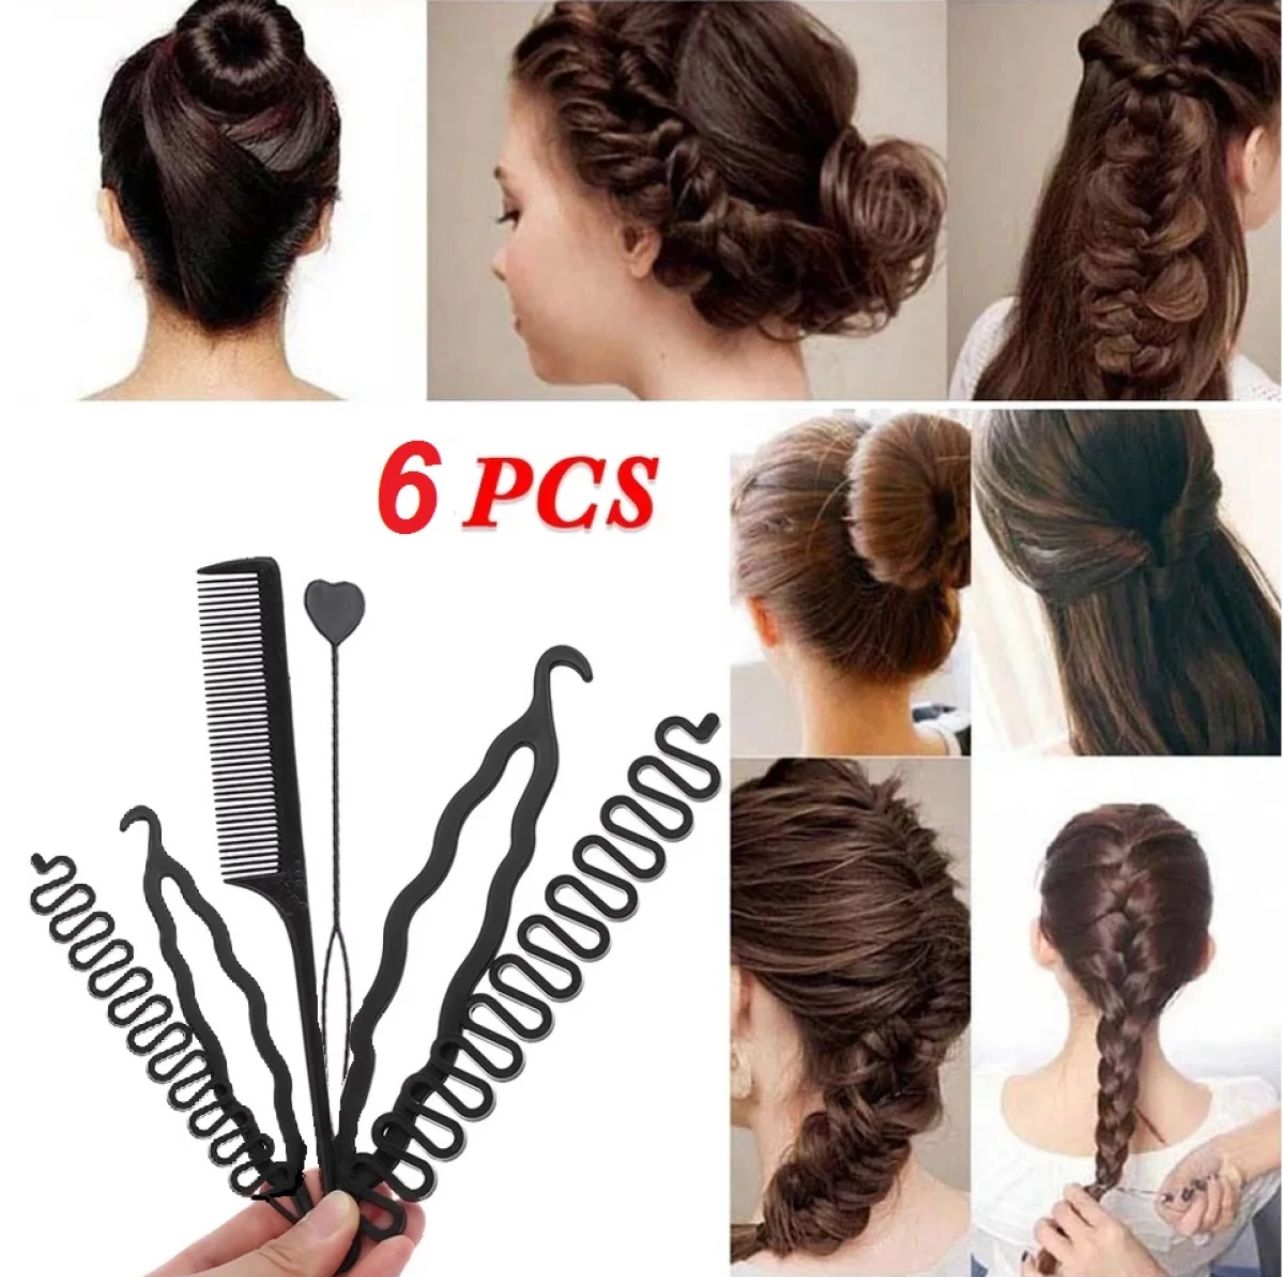 Girls hair styling accessories set 6pcs/set for making buns, twists and creative hair styling